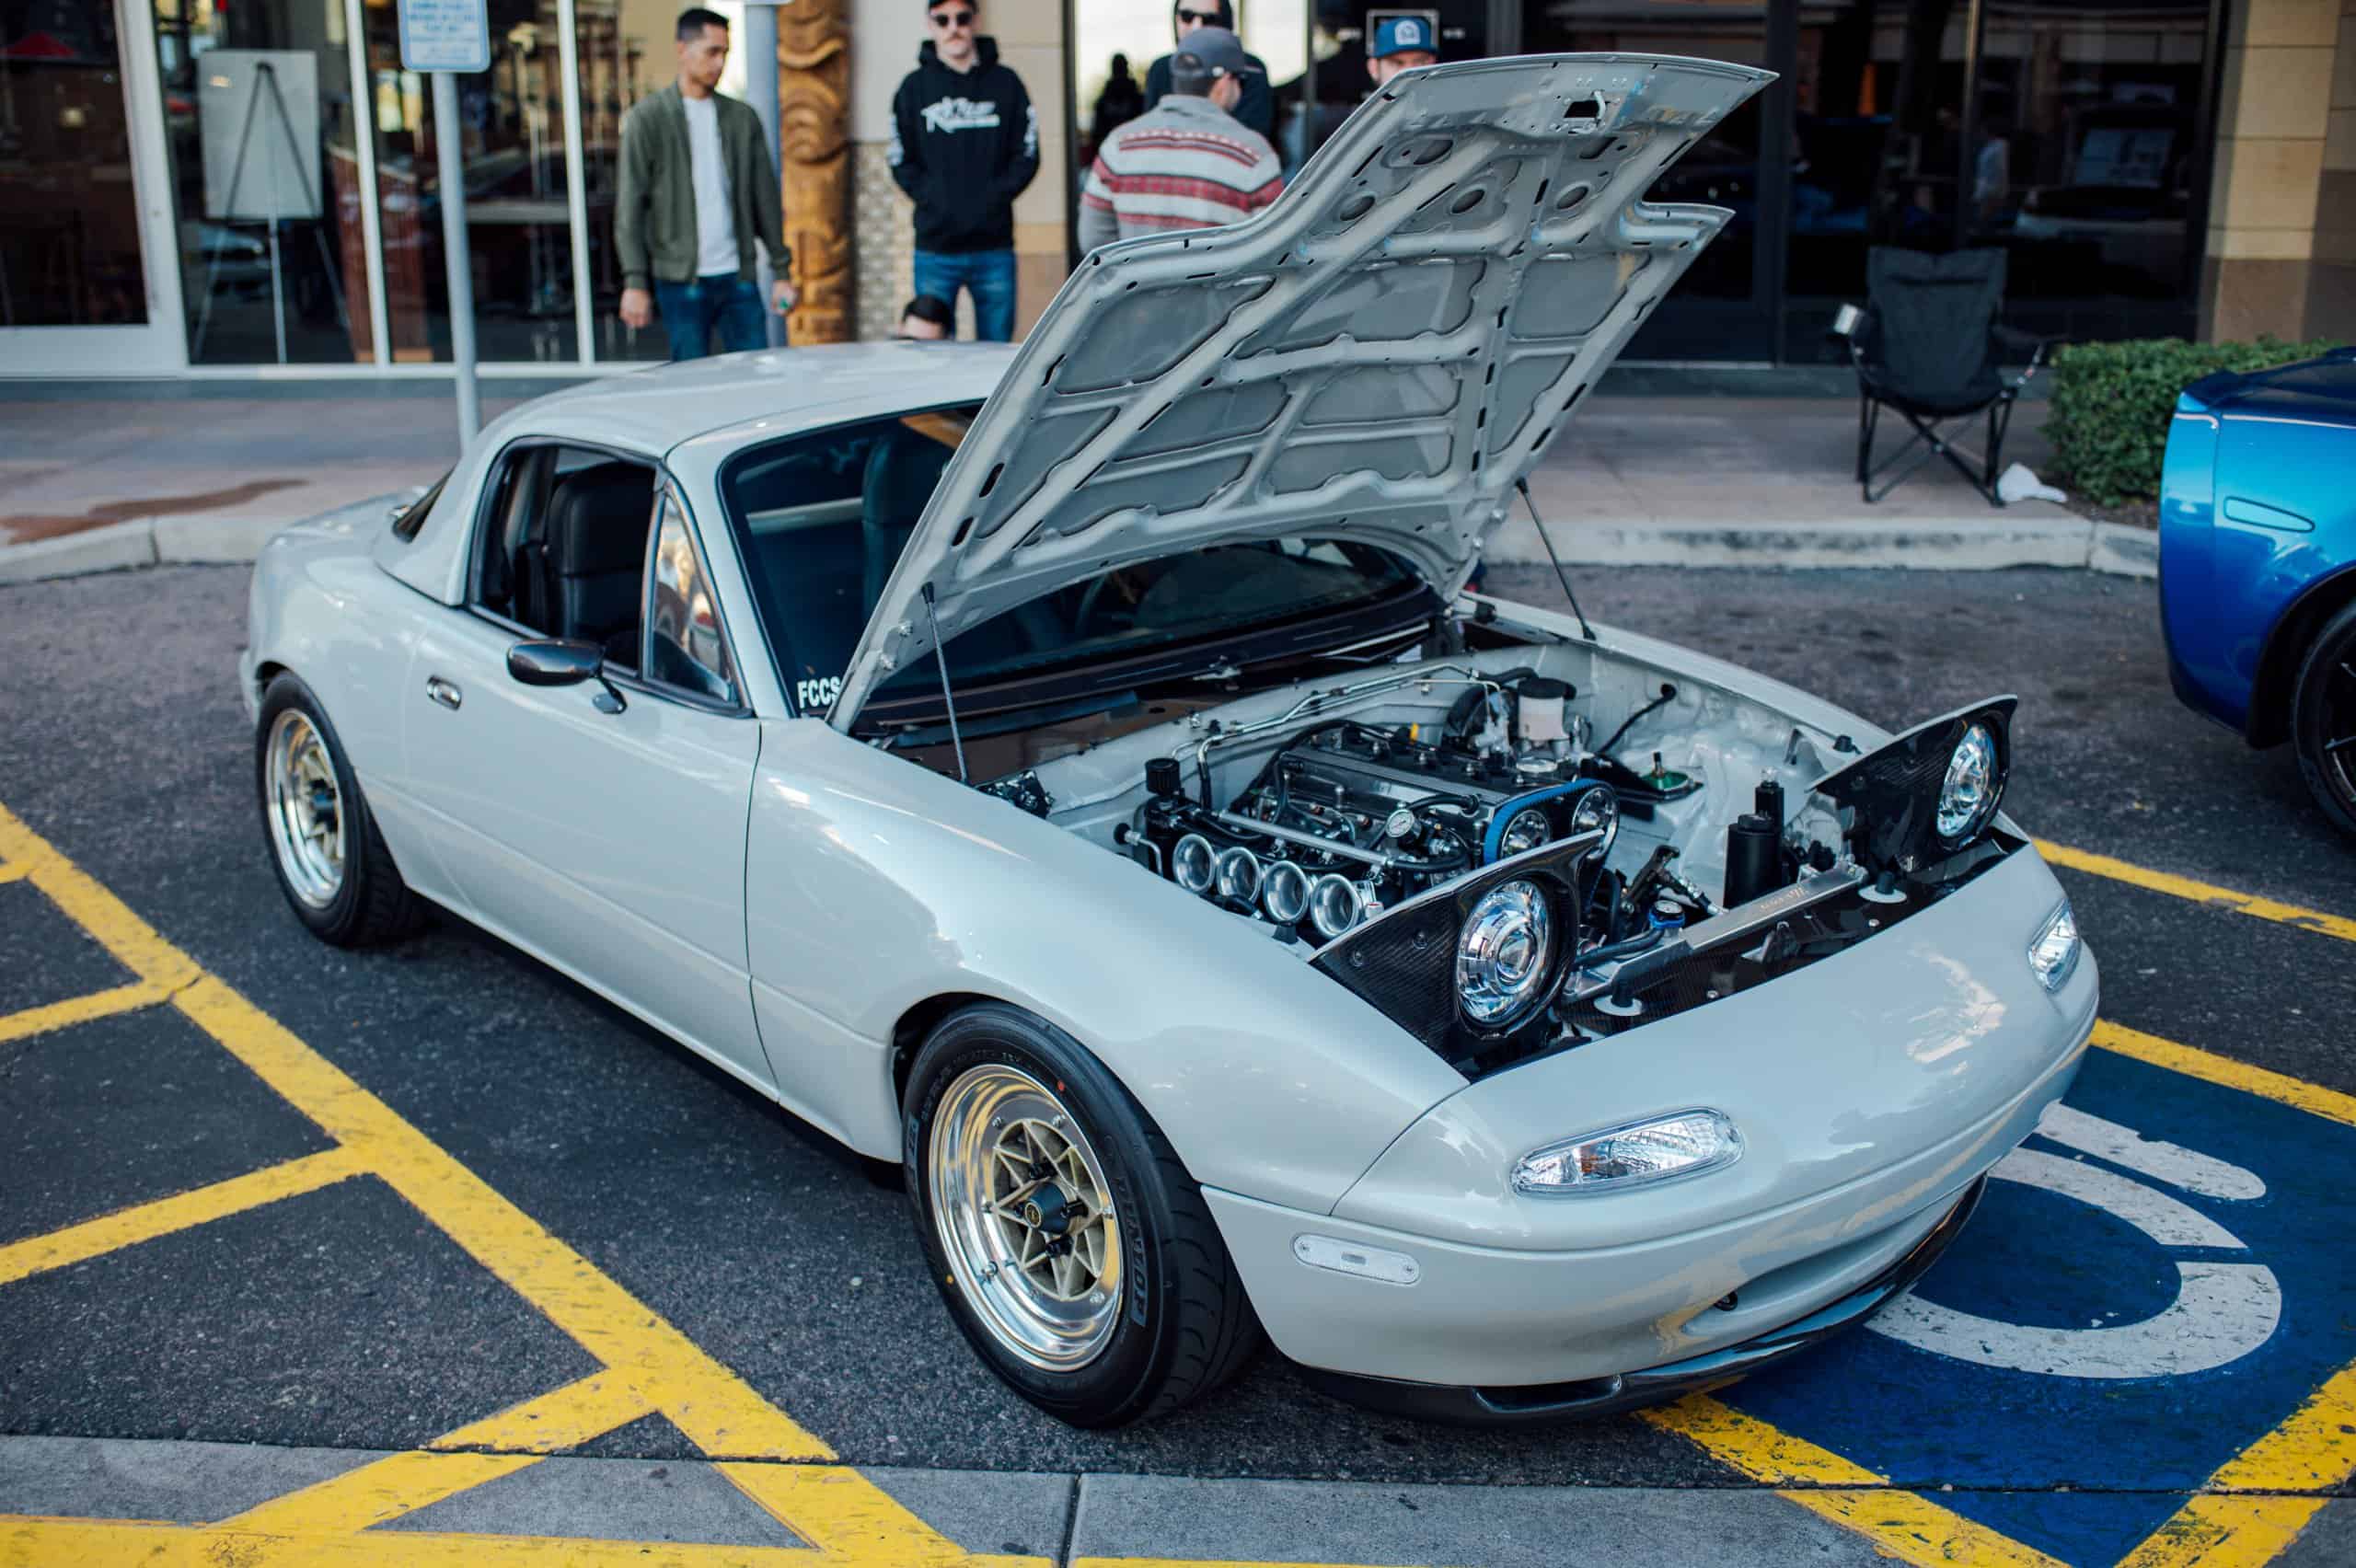 Nick Hammon 1992 Mazda Miata 'track car' turned 'show car' by accident at the Future Collector Car Show